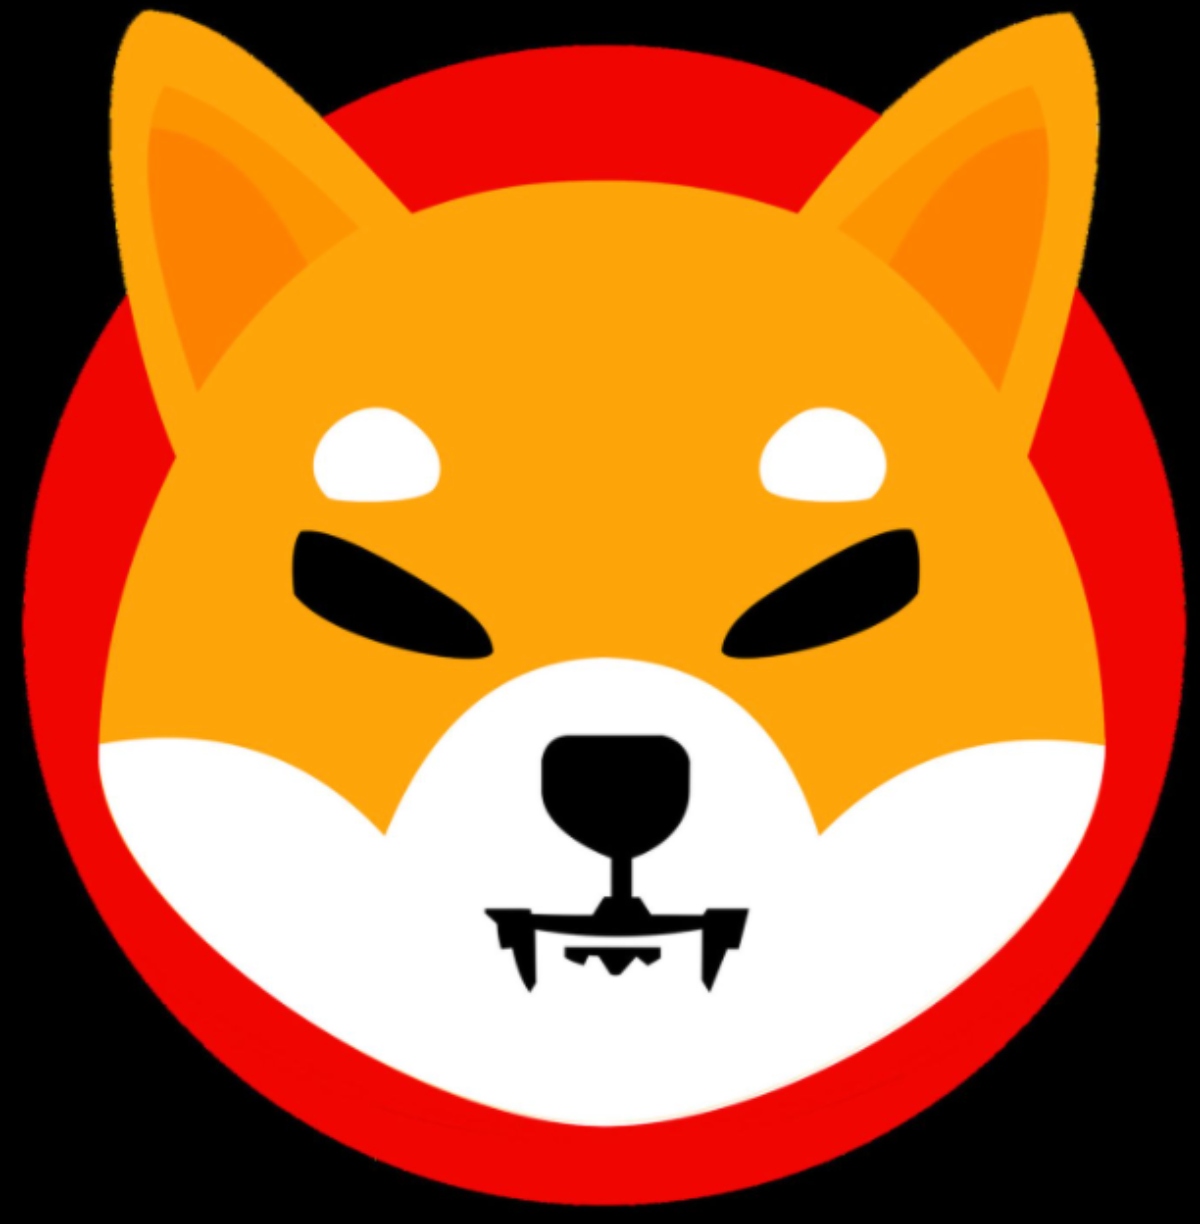 Shiba Inu roadmap: What to expect from SHIB in 2022